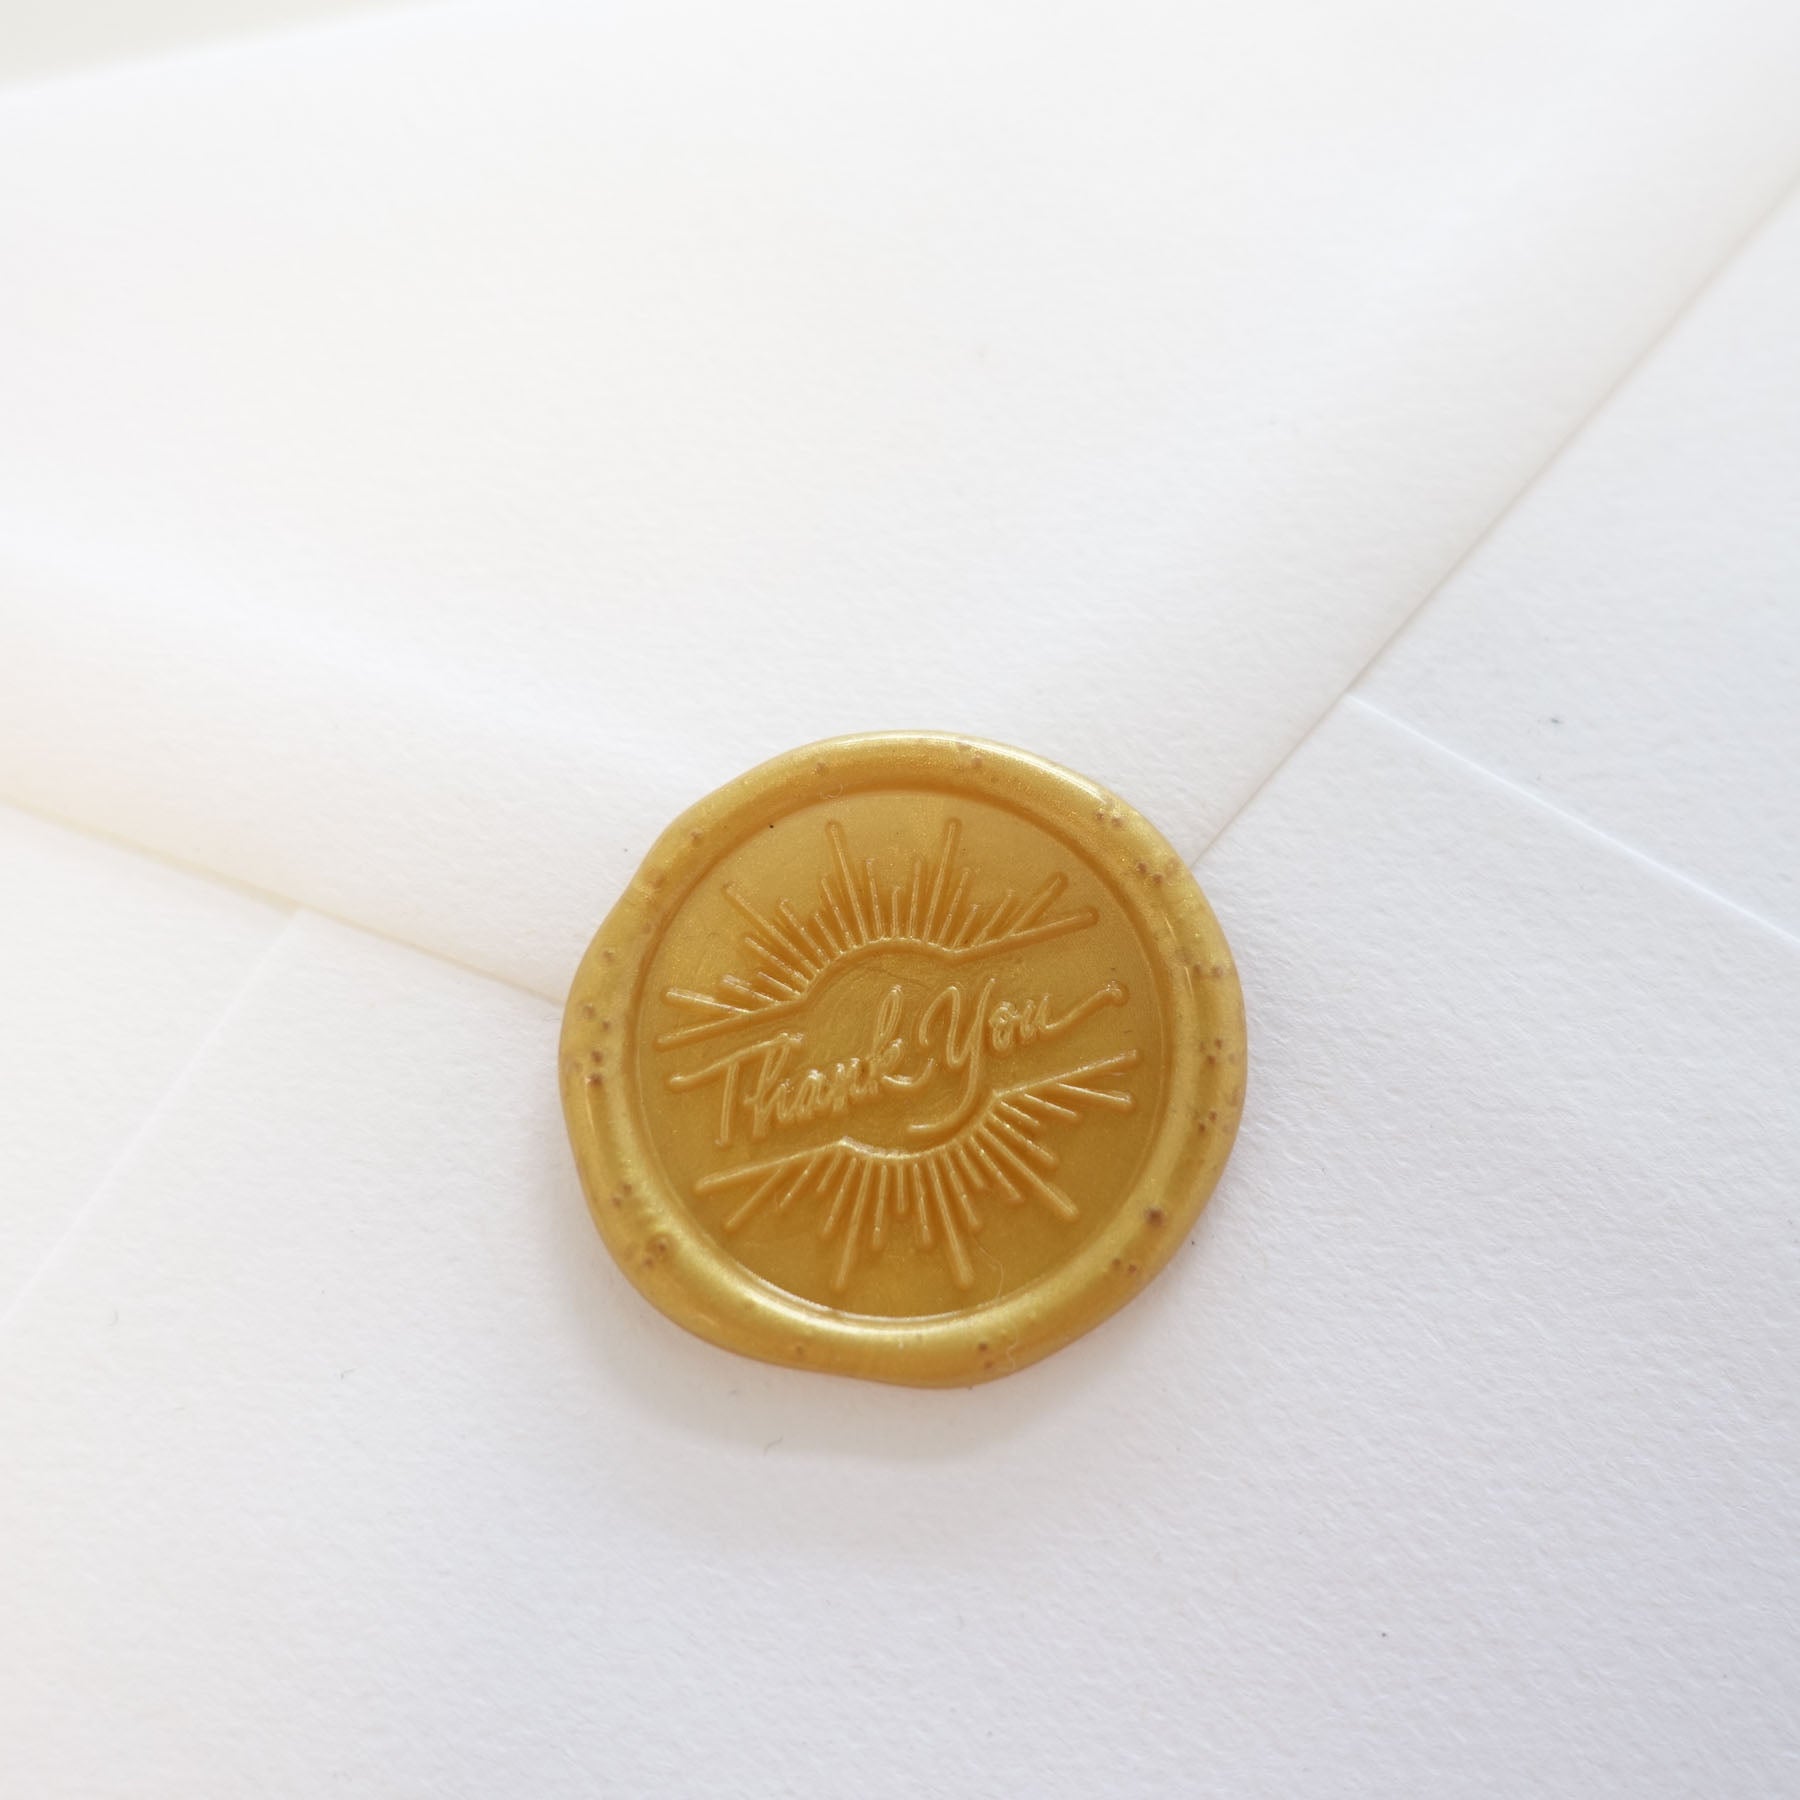 Give Thanks word Wax Seal Stamp Head, 1 diameter